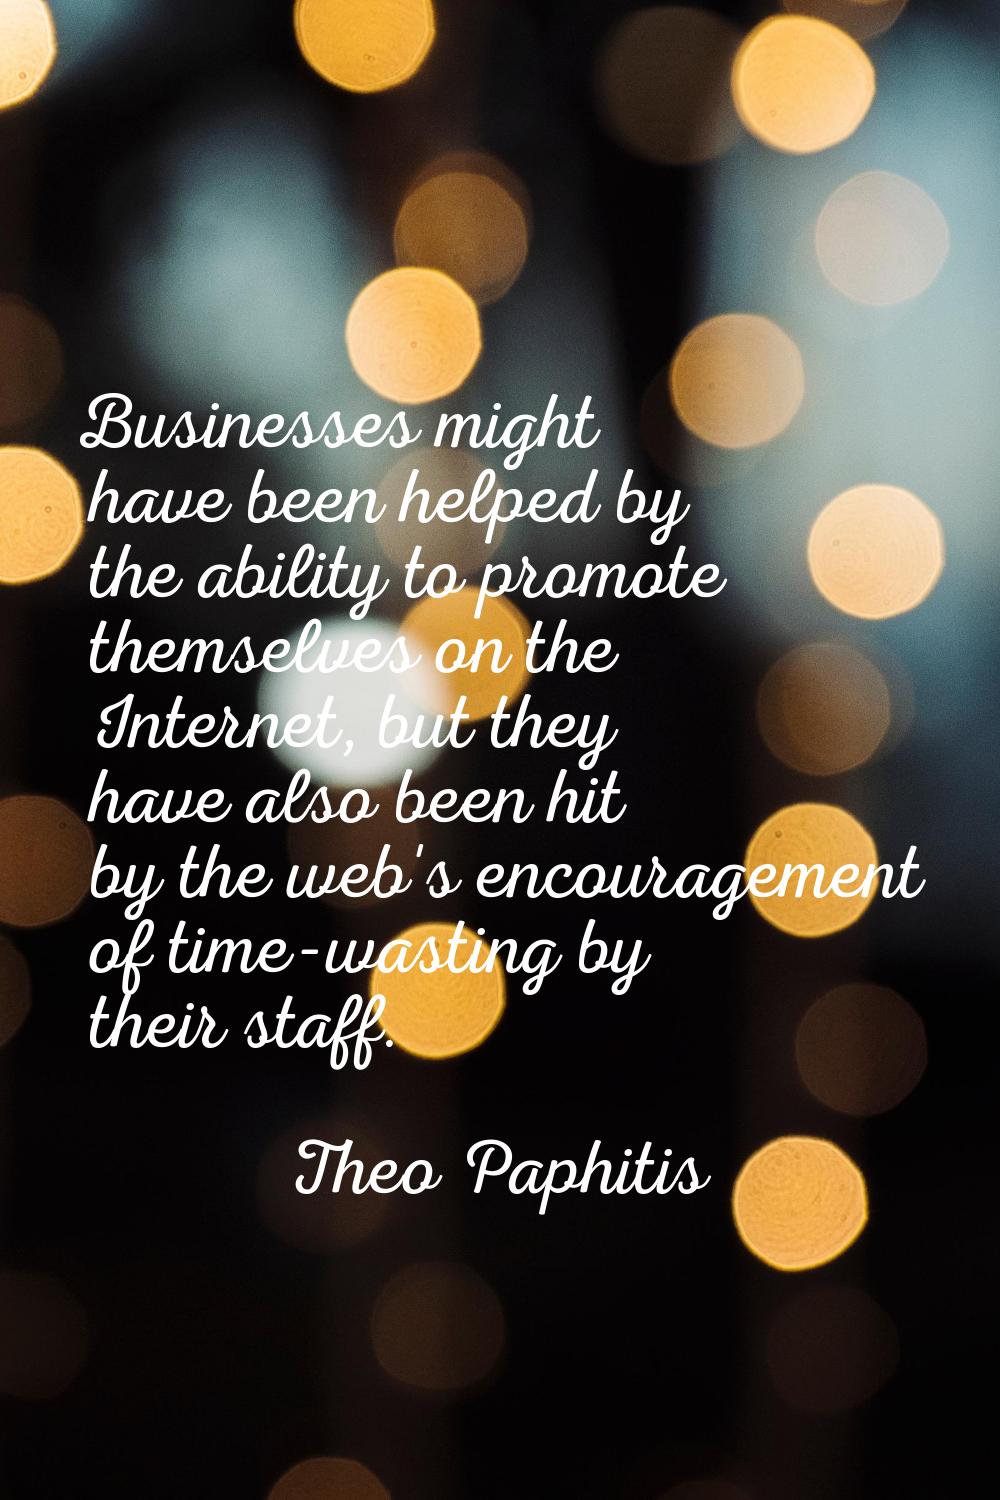 Businesses might have been helped by the ability to promote themselves on the Internet, but they ha